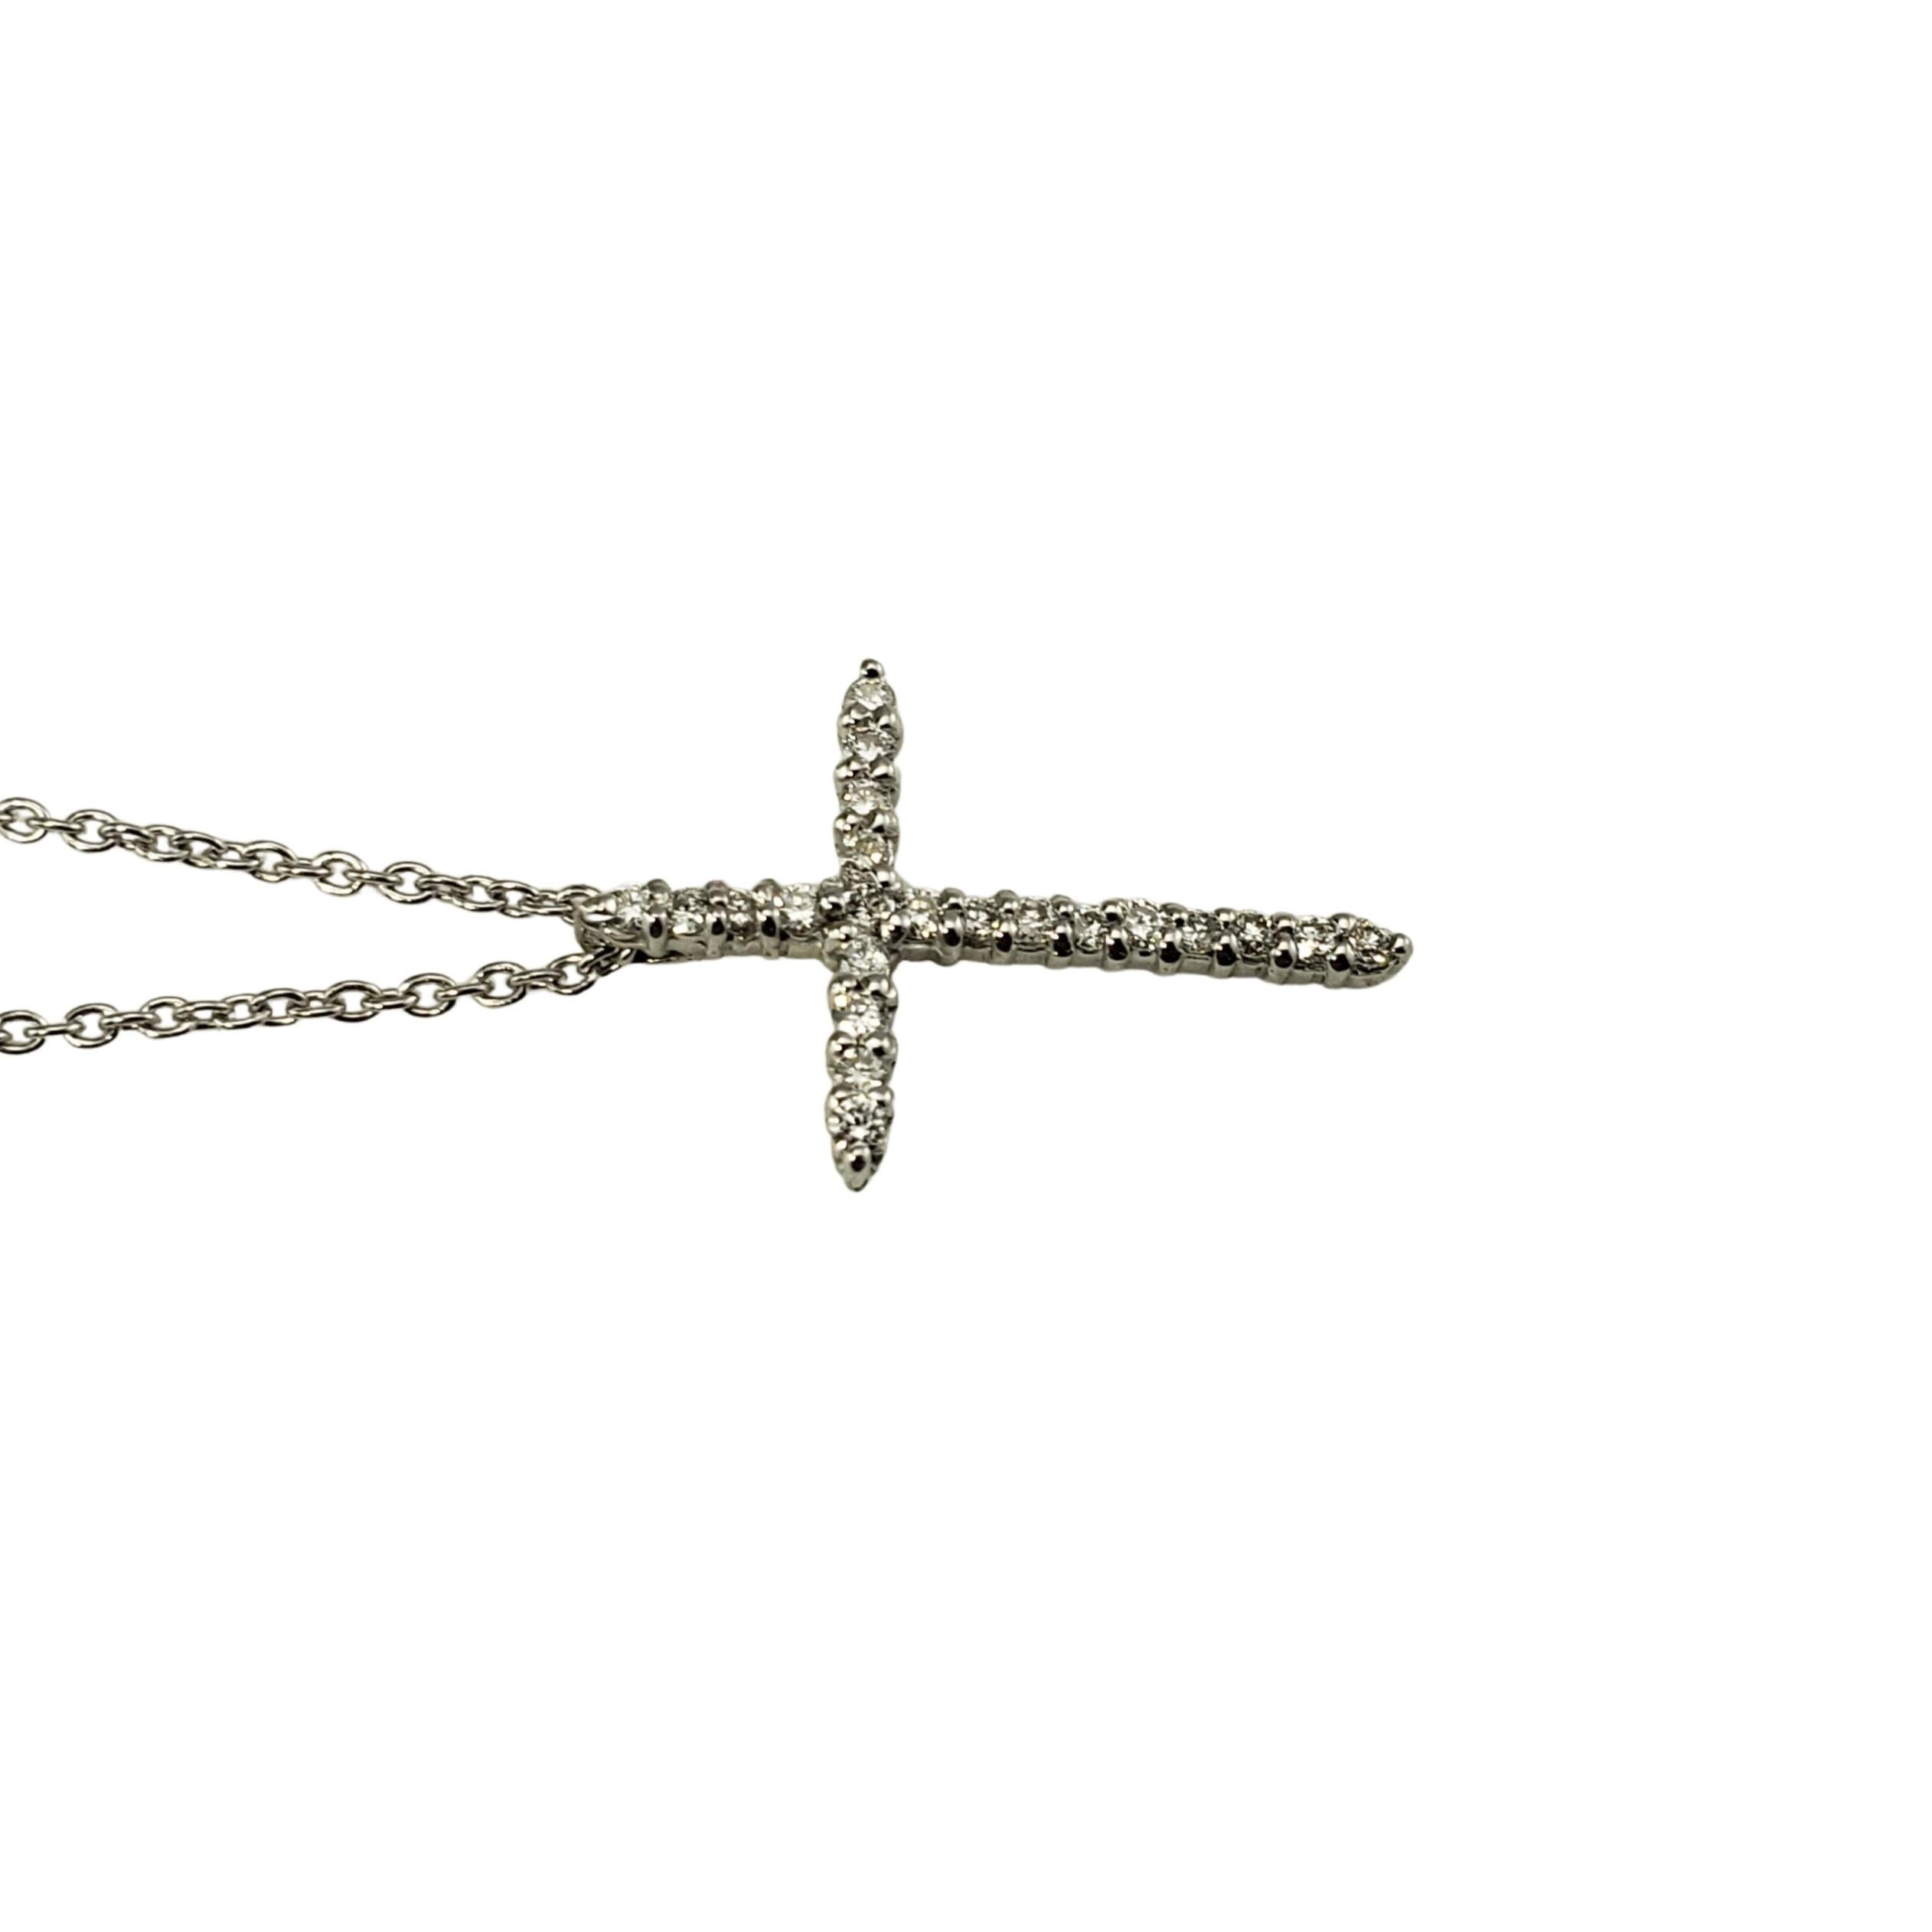 Vintage Roberto Coin 18 Karat White Gold Diamond Cross Pendant Necklace-

This sparkling cross pendant features 22 round brilliant cut diamonds and suspends from a classic white gold chain.

Approximate total diamond weight:  .10 ct.

Diamond color: